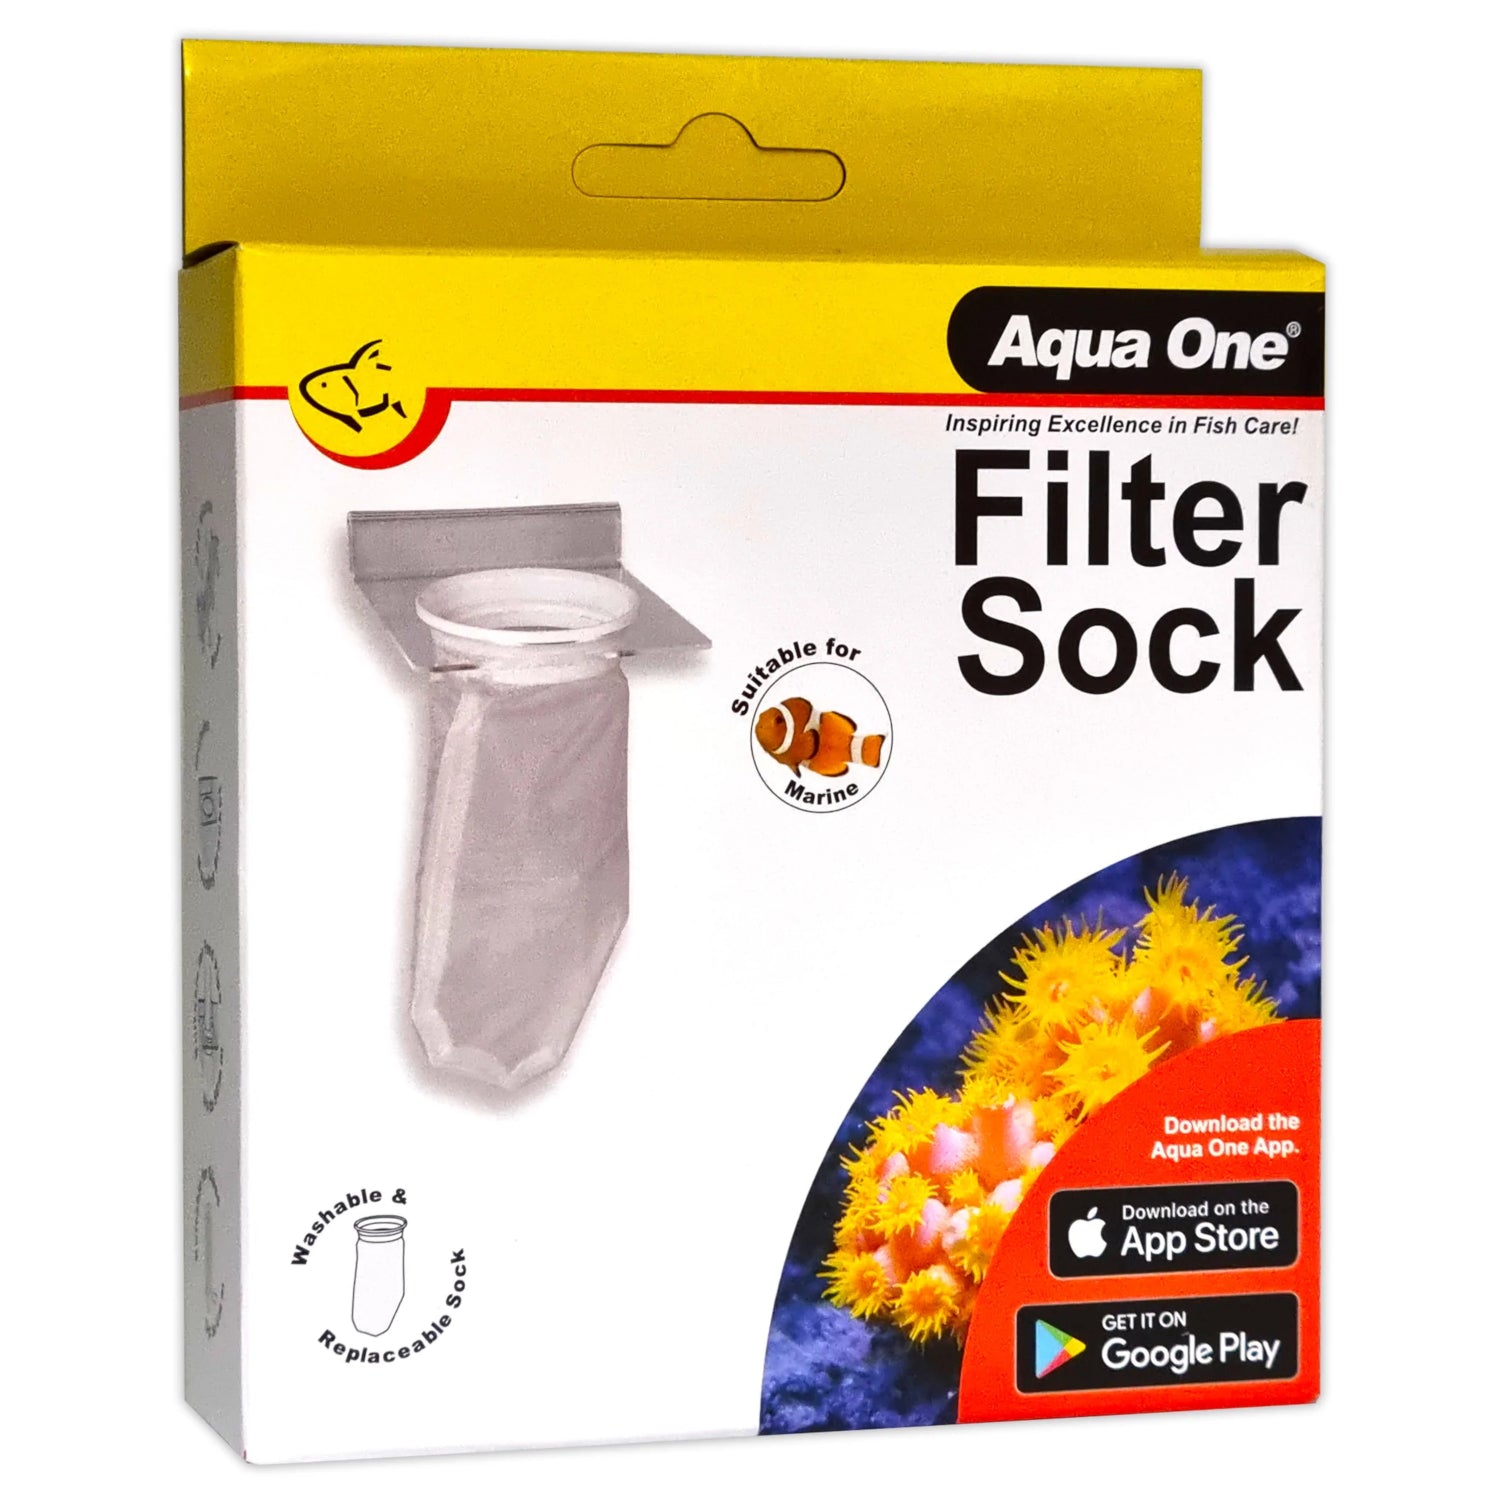 Aqua One Filter Sock 200 Micron with Acrylic Holder